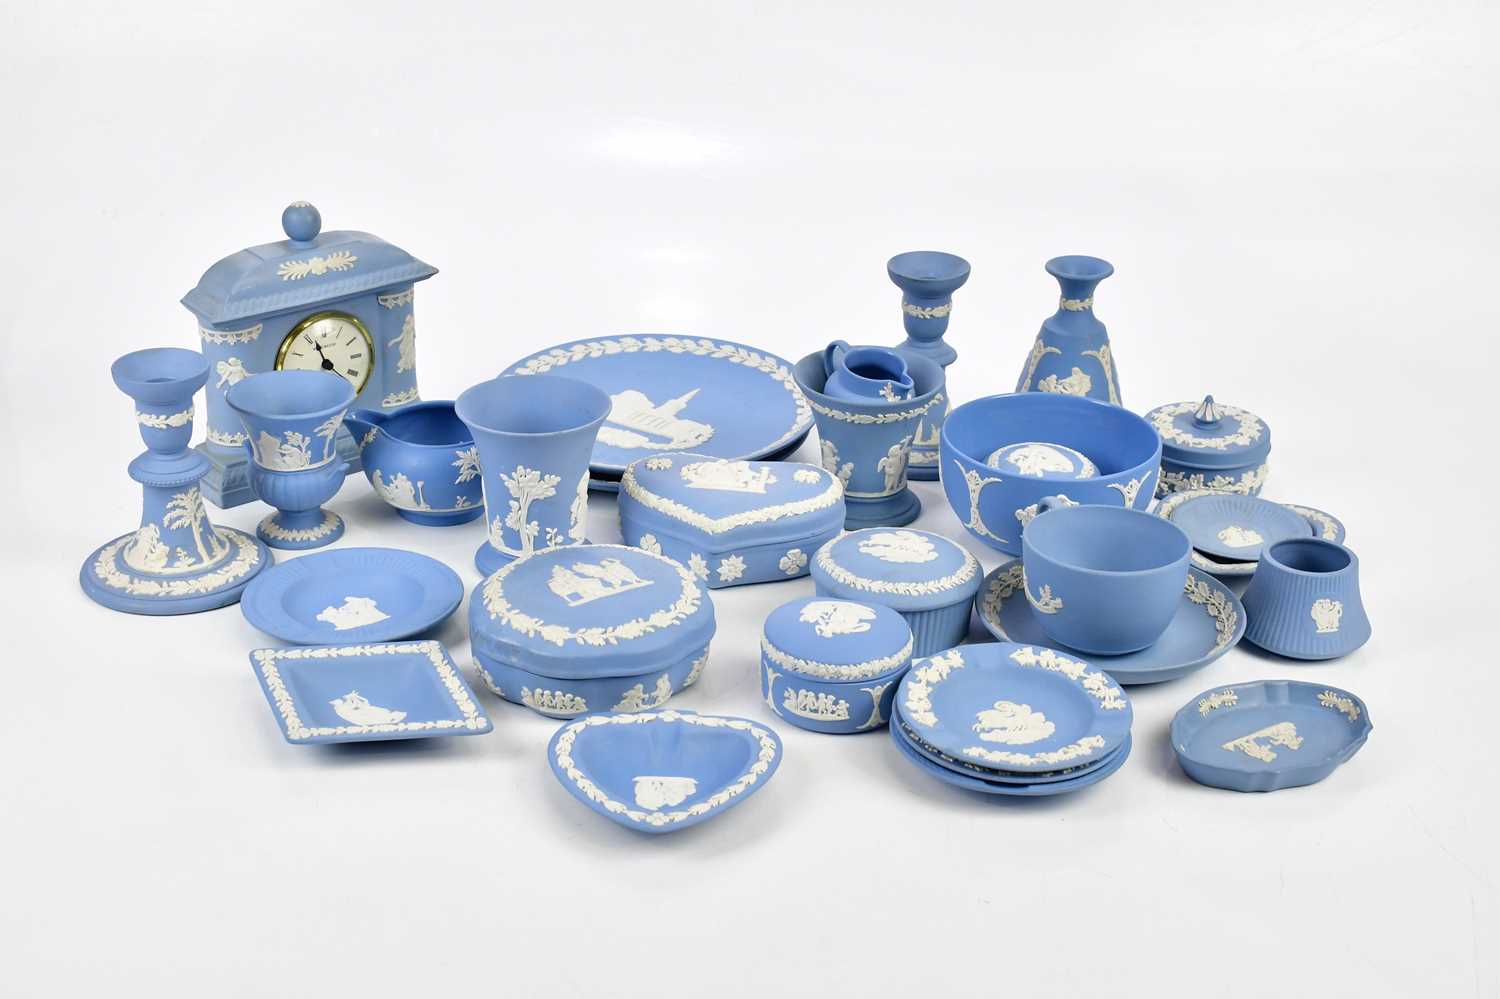 WEDGWOOD; a collection of jasperware including trinket boxes, clock, dishes, candlesticks, etc.